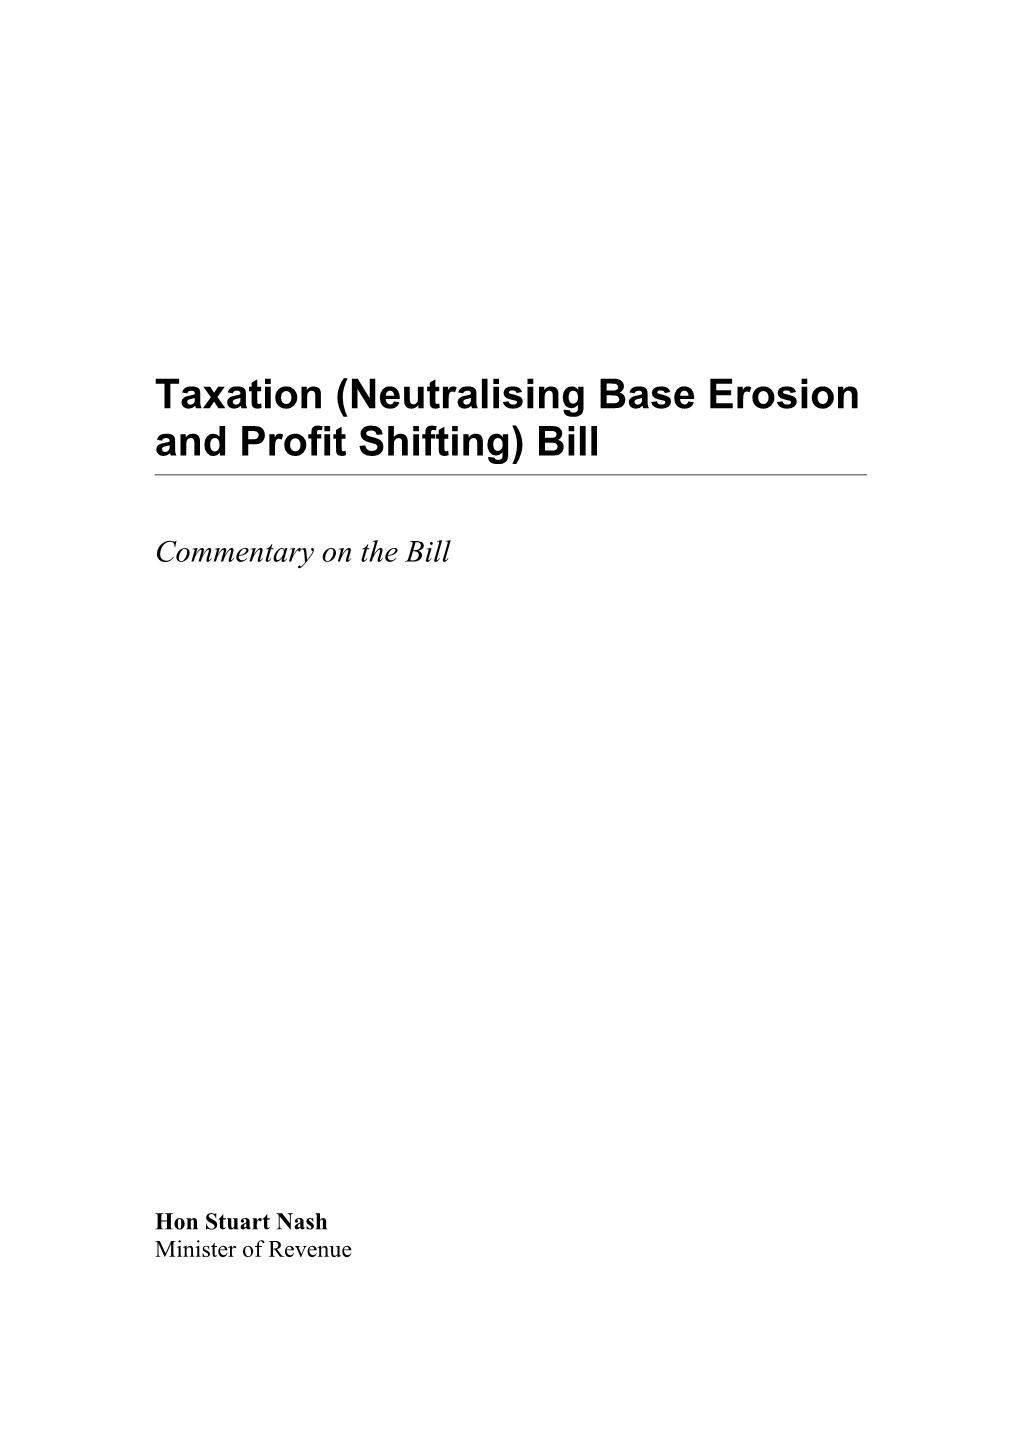 Taxation (Neutralising Base Erosion and Profit Shifting) Bill - Commentary on the Bill